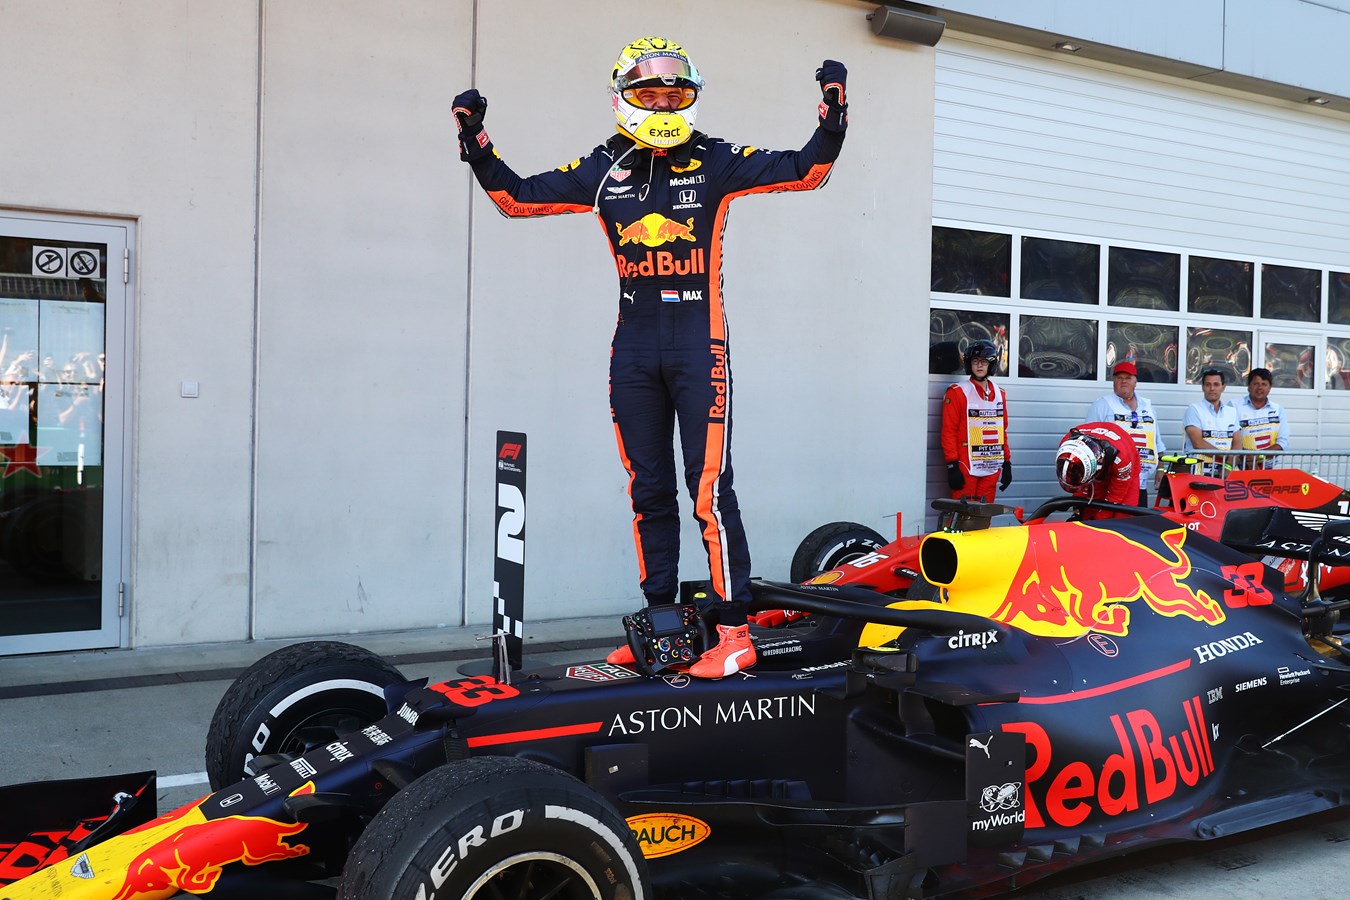 Momentous day for Honda as Max Verstappen takes victory in Austria